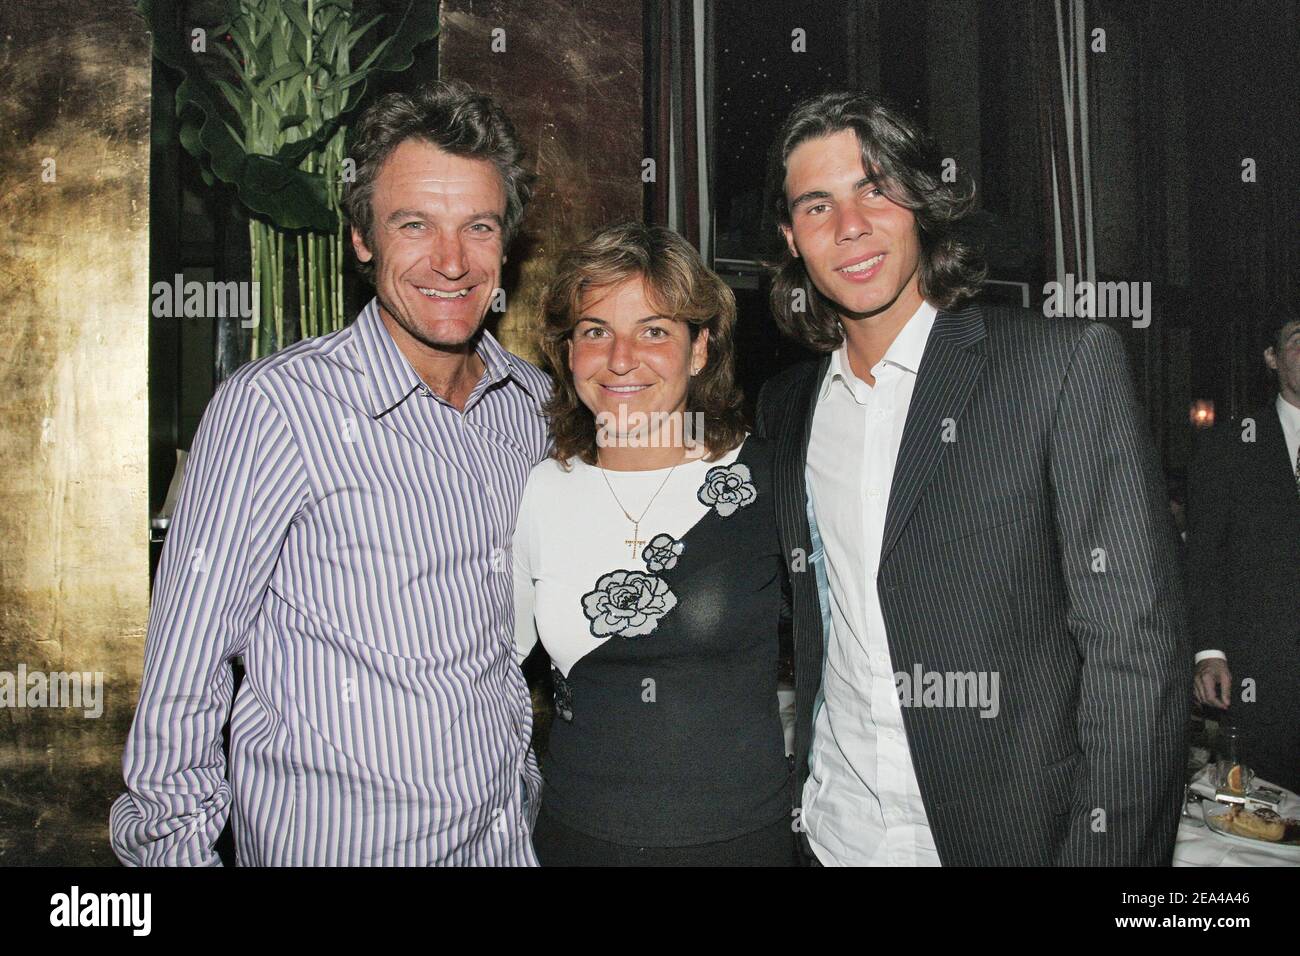 EXCLUSIVE. Spanish 2005 Roland Garros winner Rafael Nadal poses with  Spanish player Arantxa Sanchez-Vicario and Swedish Mats Wilander while  celebrating his victory at the 'Cafe de l'Homme', a restaurant overlooking  the Eiffel